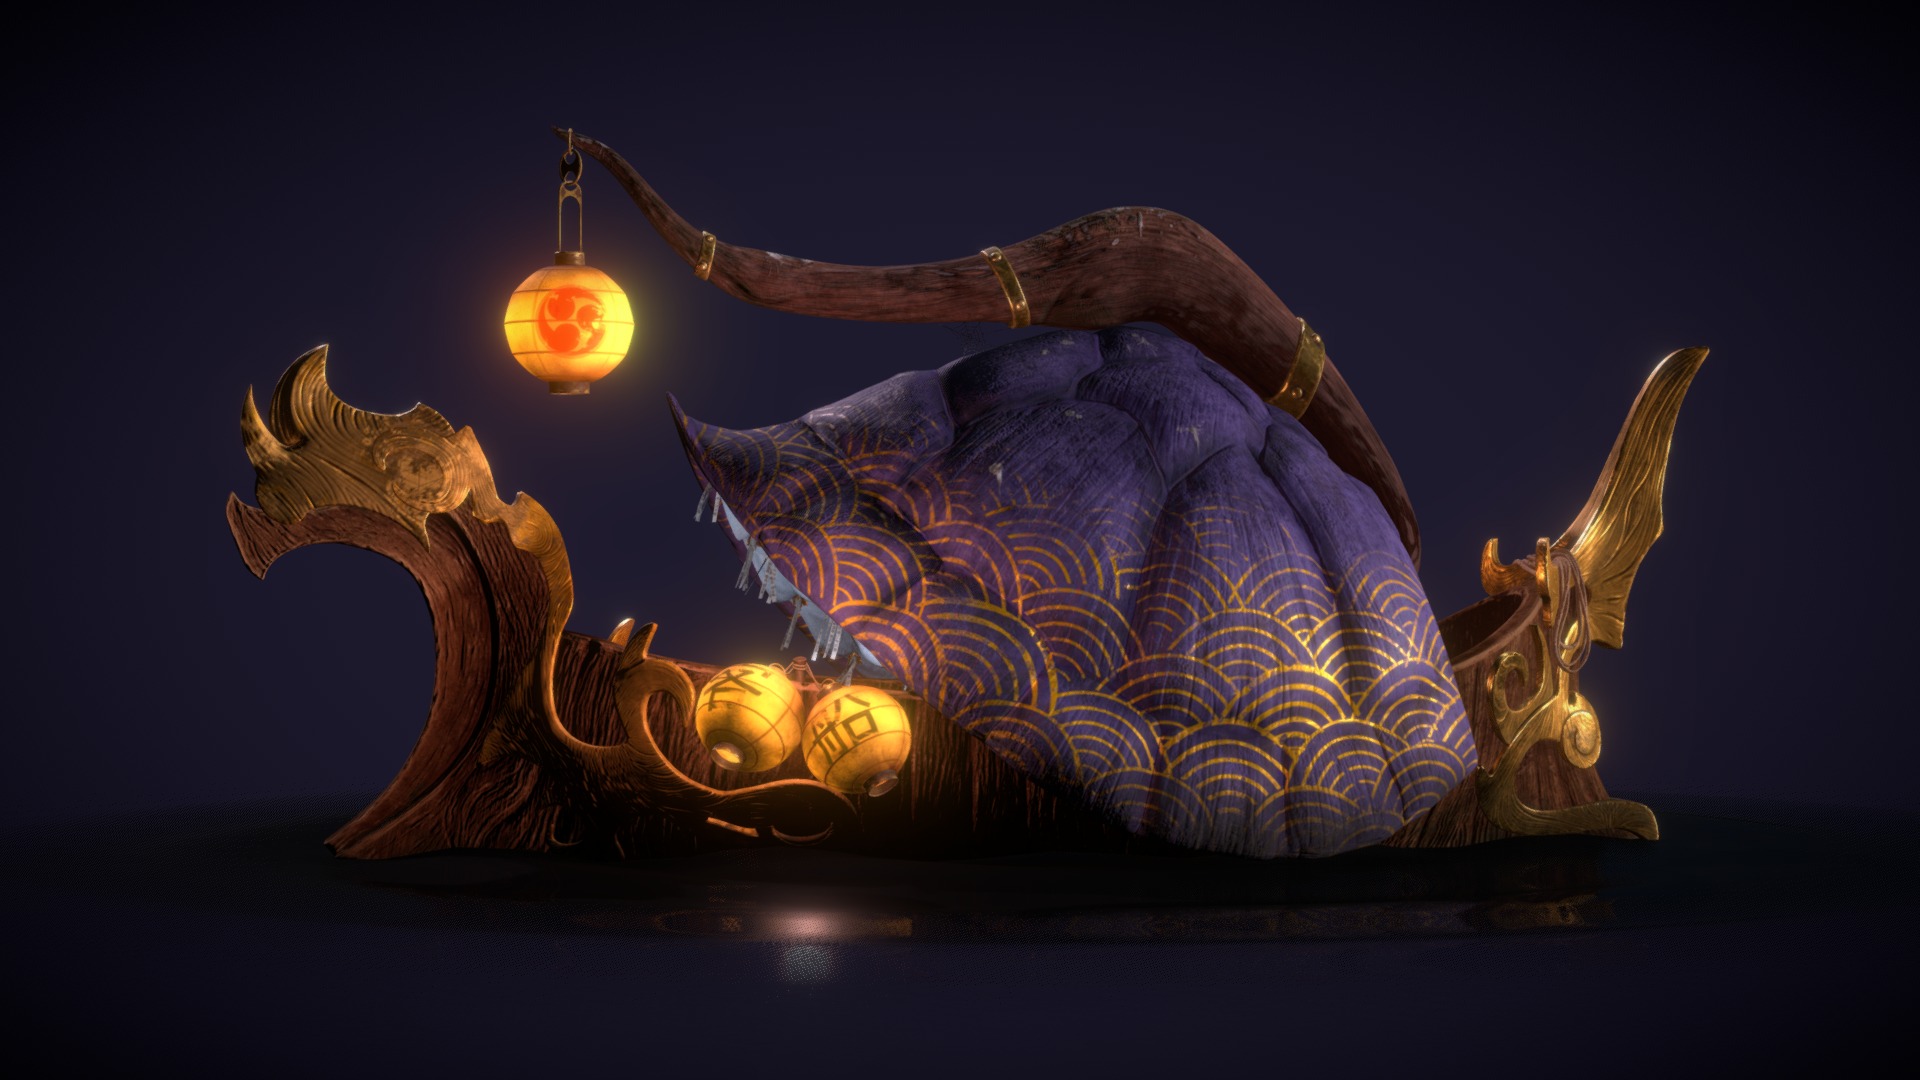 3D model Turtle Gondola on water - This is a 3D model of the Turtle Gondola on water. The 3D model is about a carved pumpkin with a light inside.